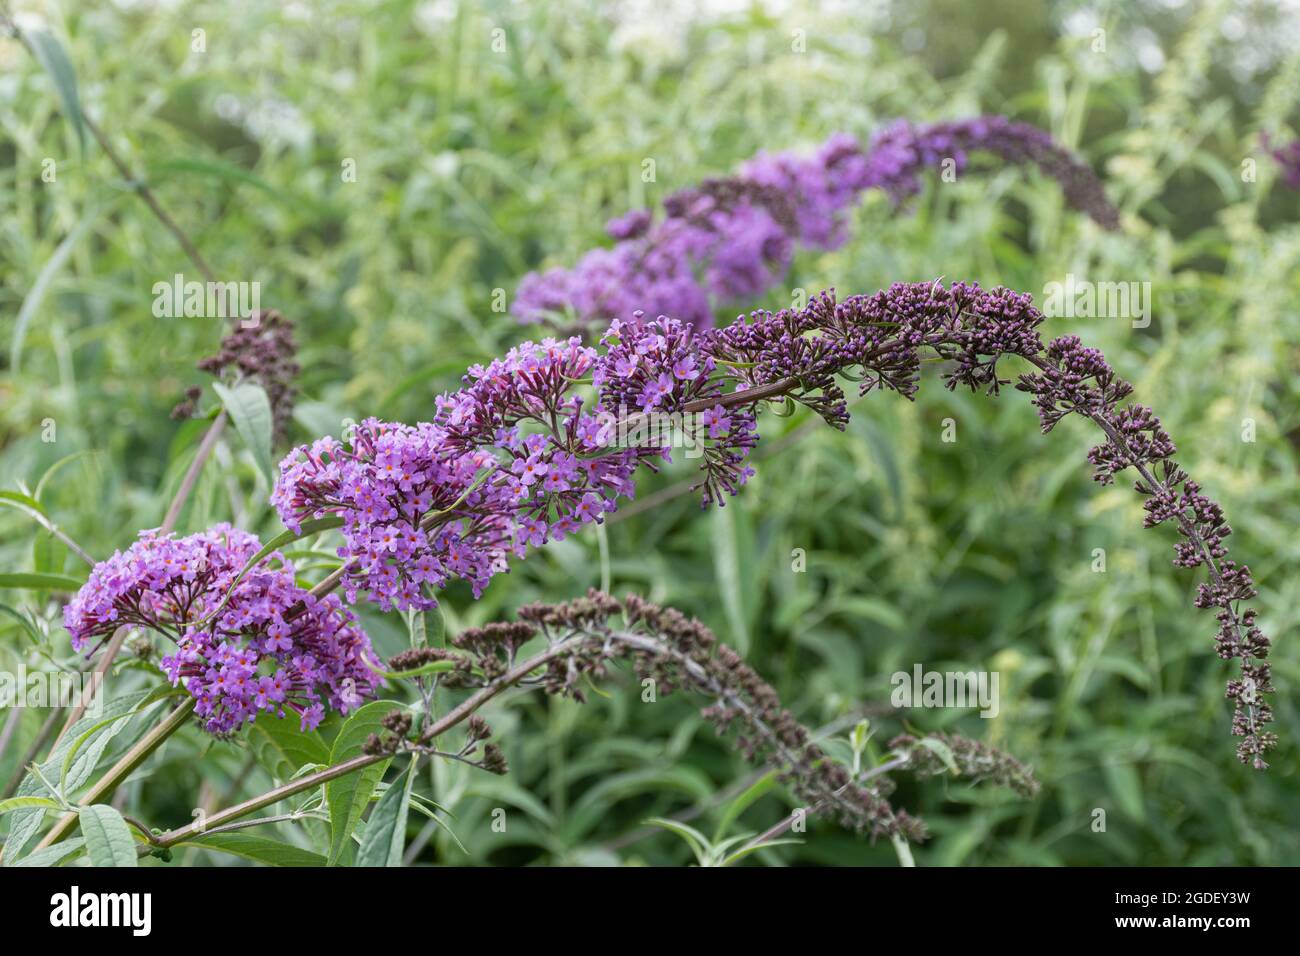 Buddleja davidii Gonglepod (buddleia variety), known as a butterfly bush, in flower during august or summer, UK Stock Photo